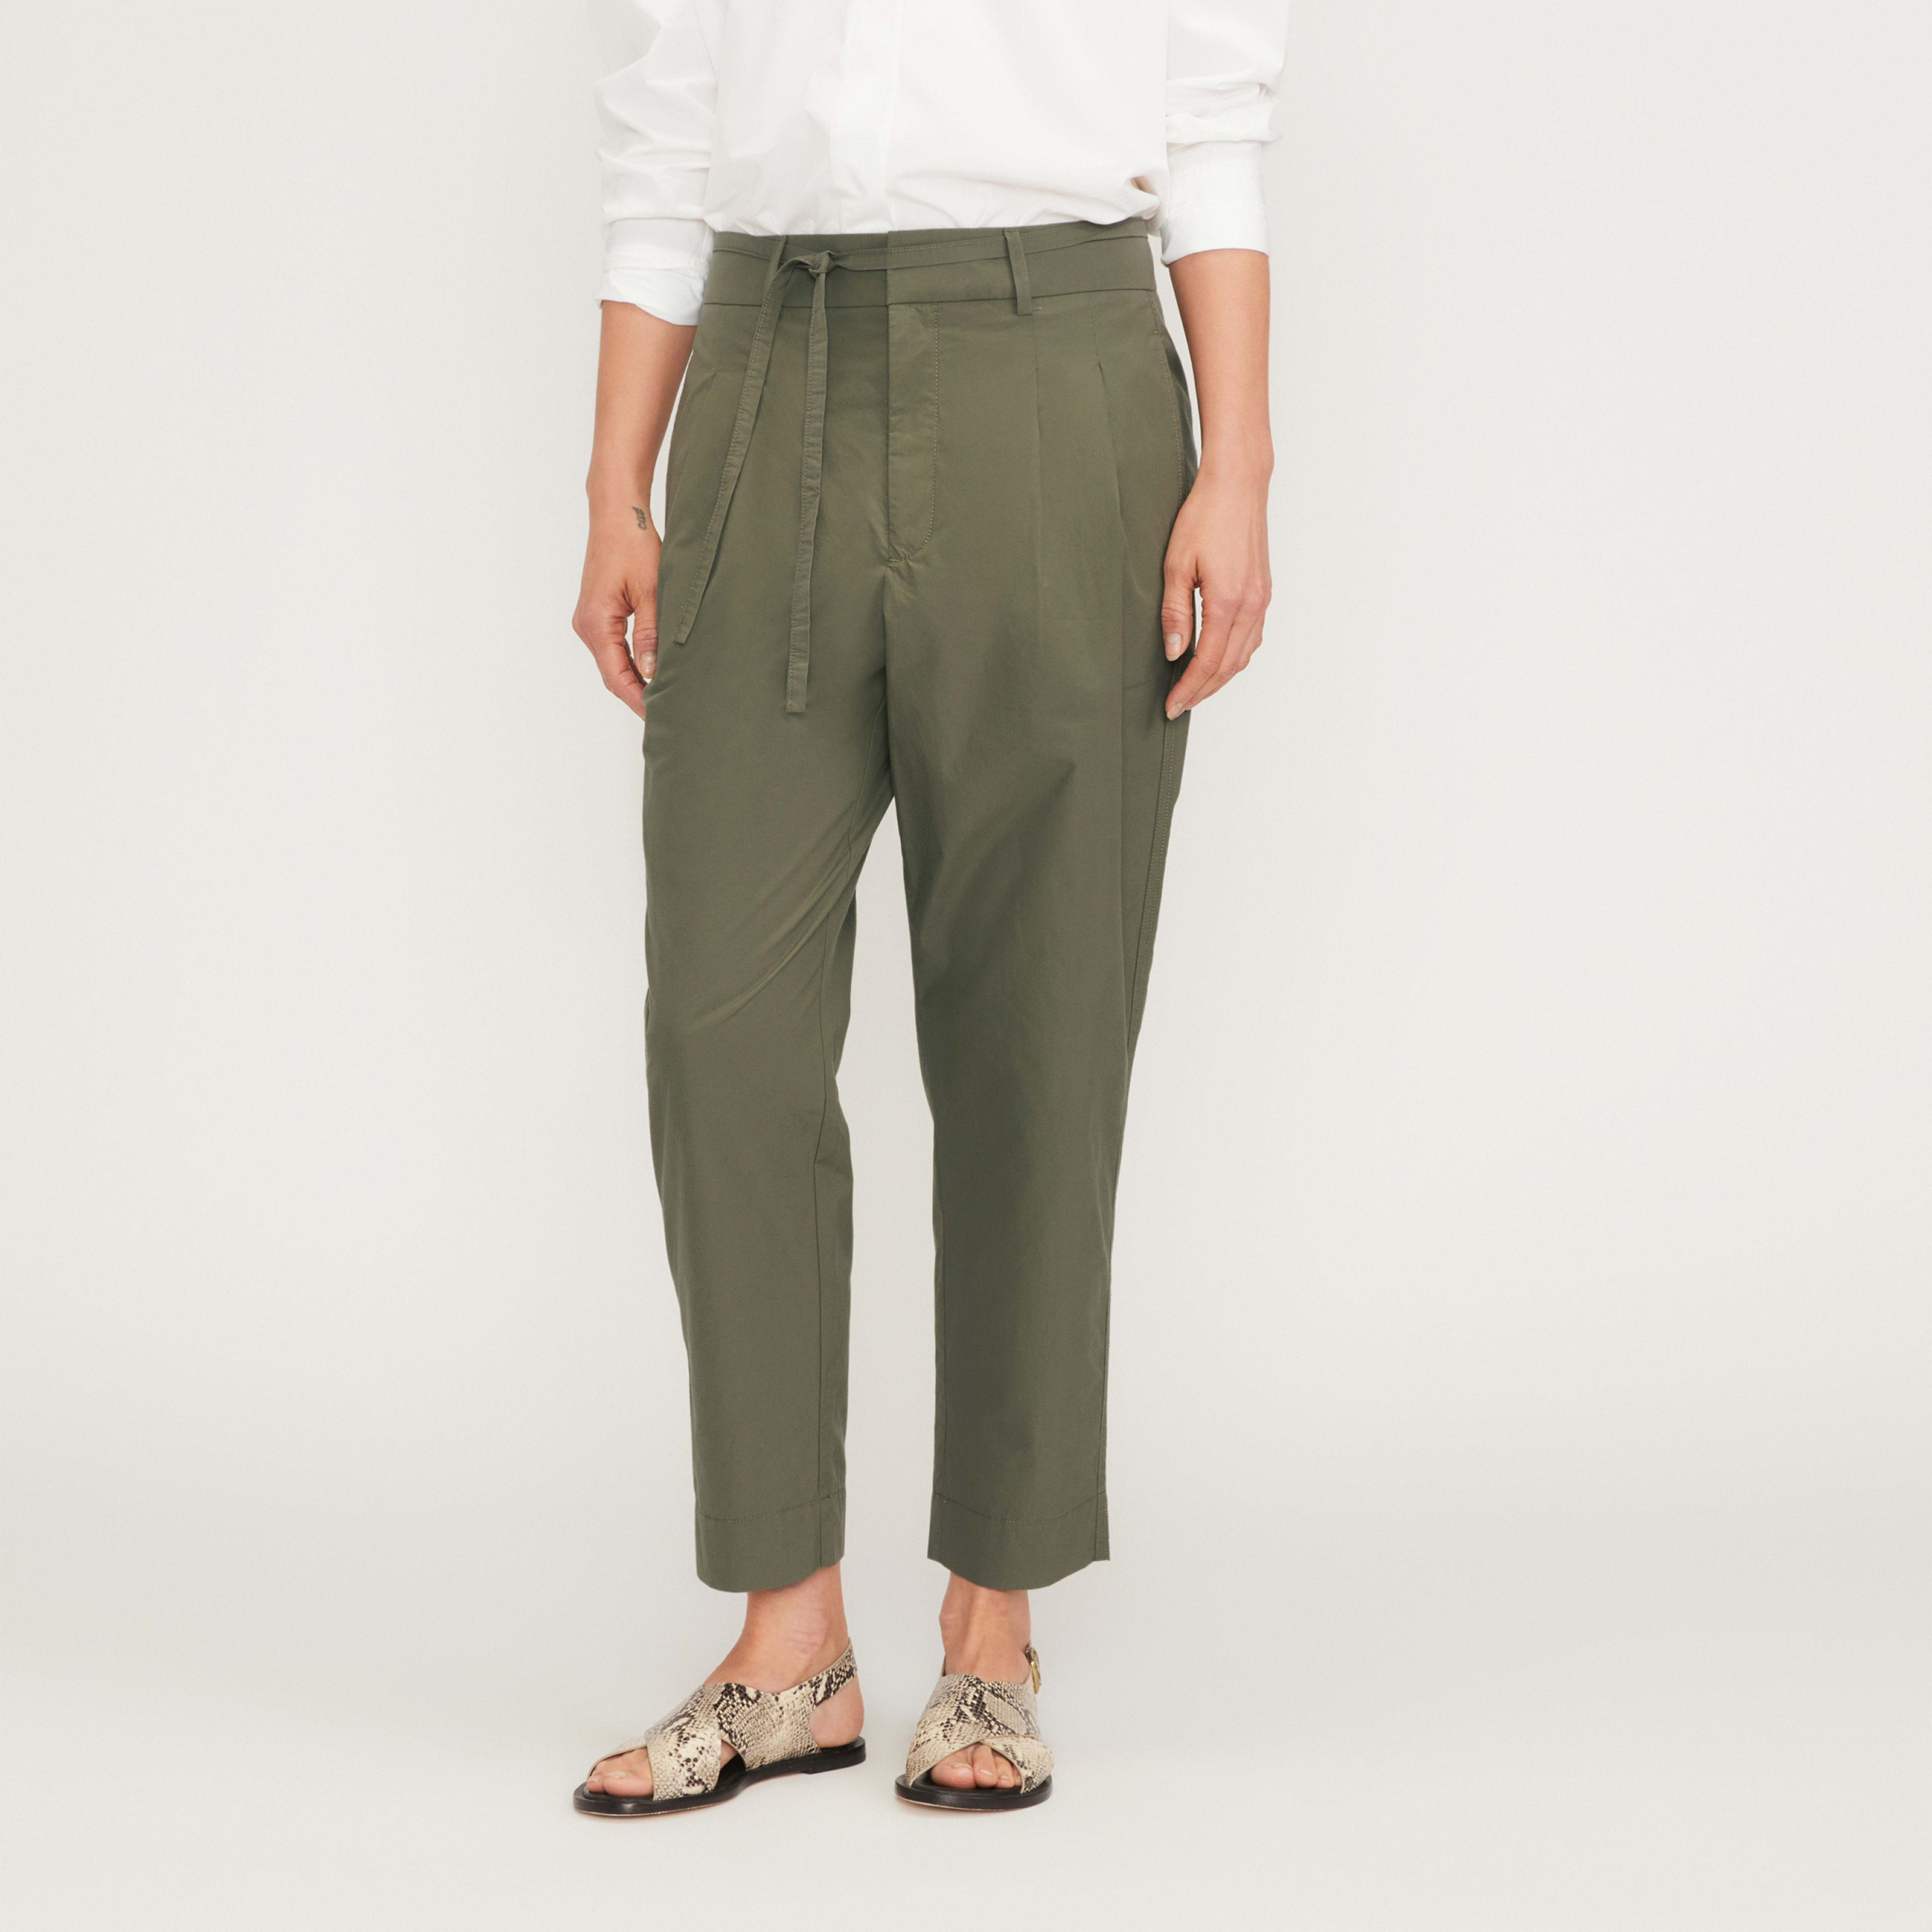 women's poplin pleated taper pant by everlane in olive, size 00